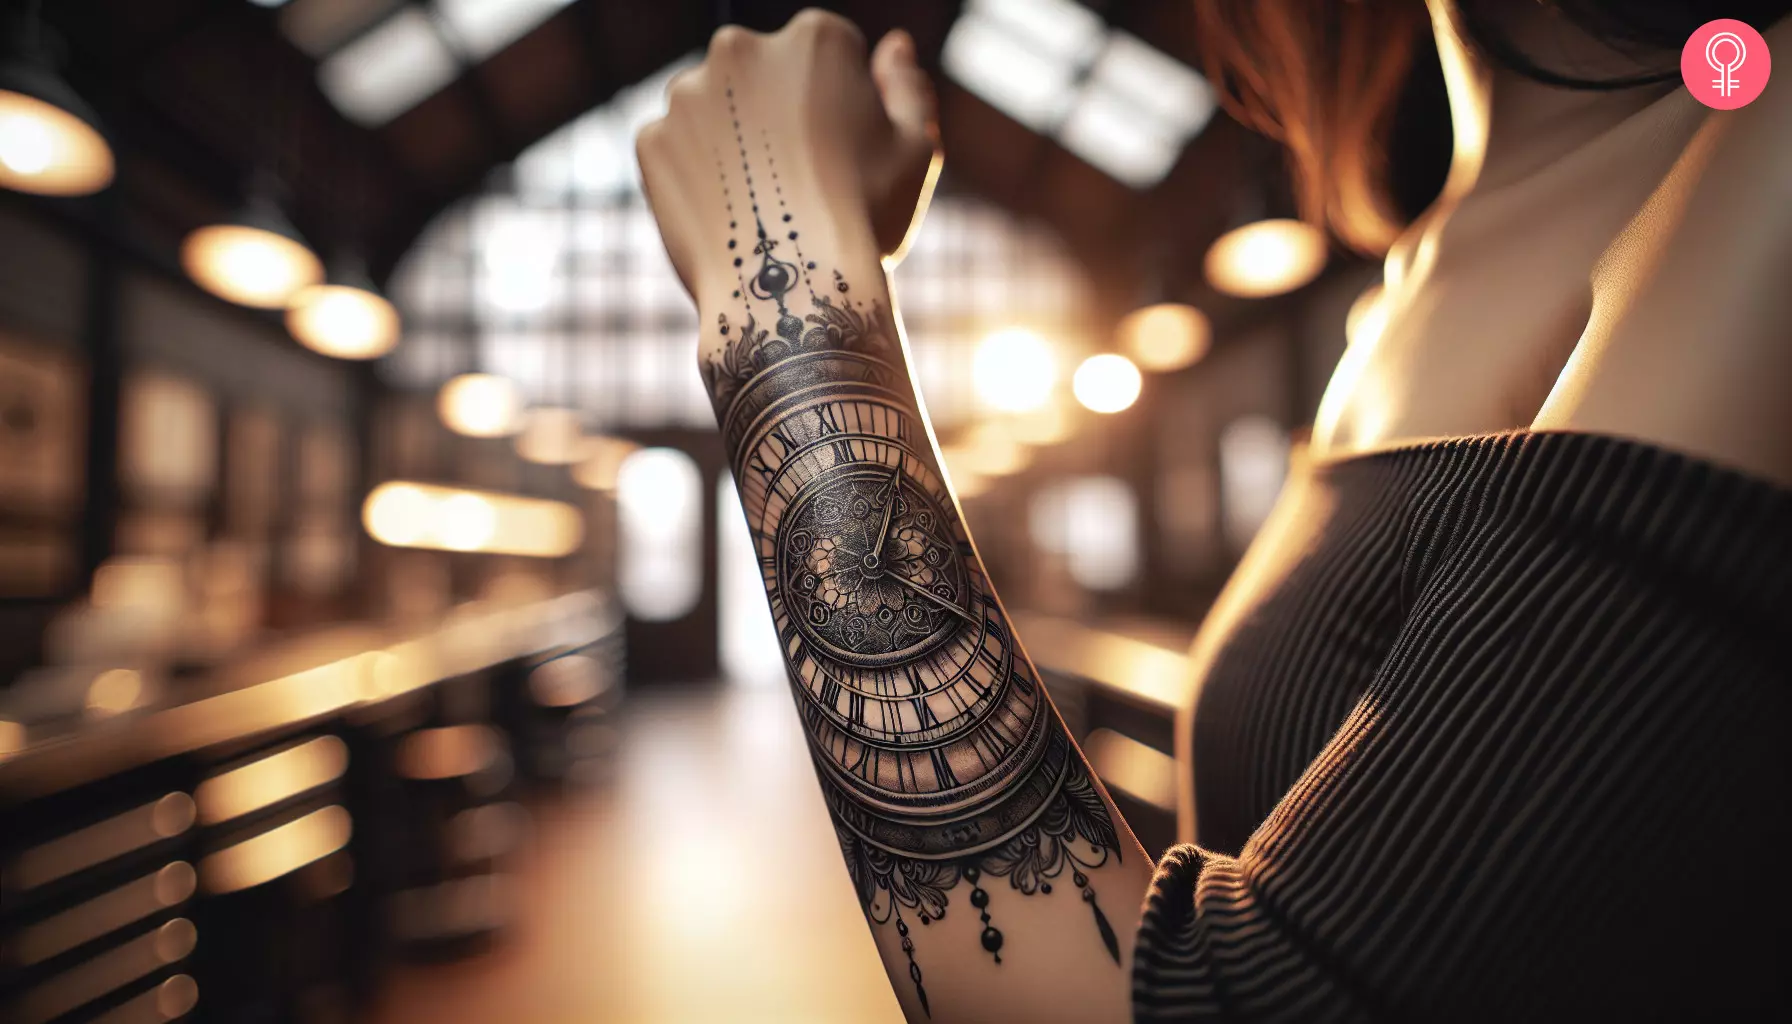 A birth clock tattoo design on the forearm of a woman